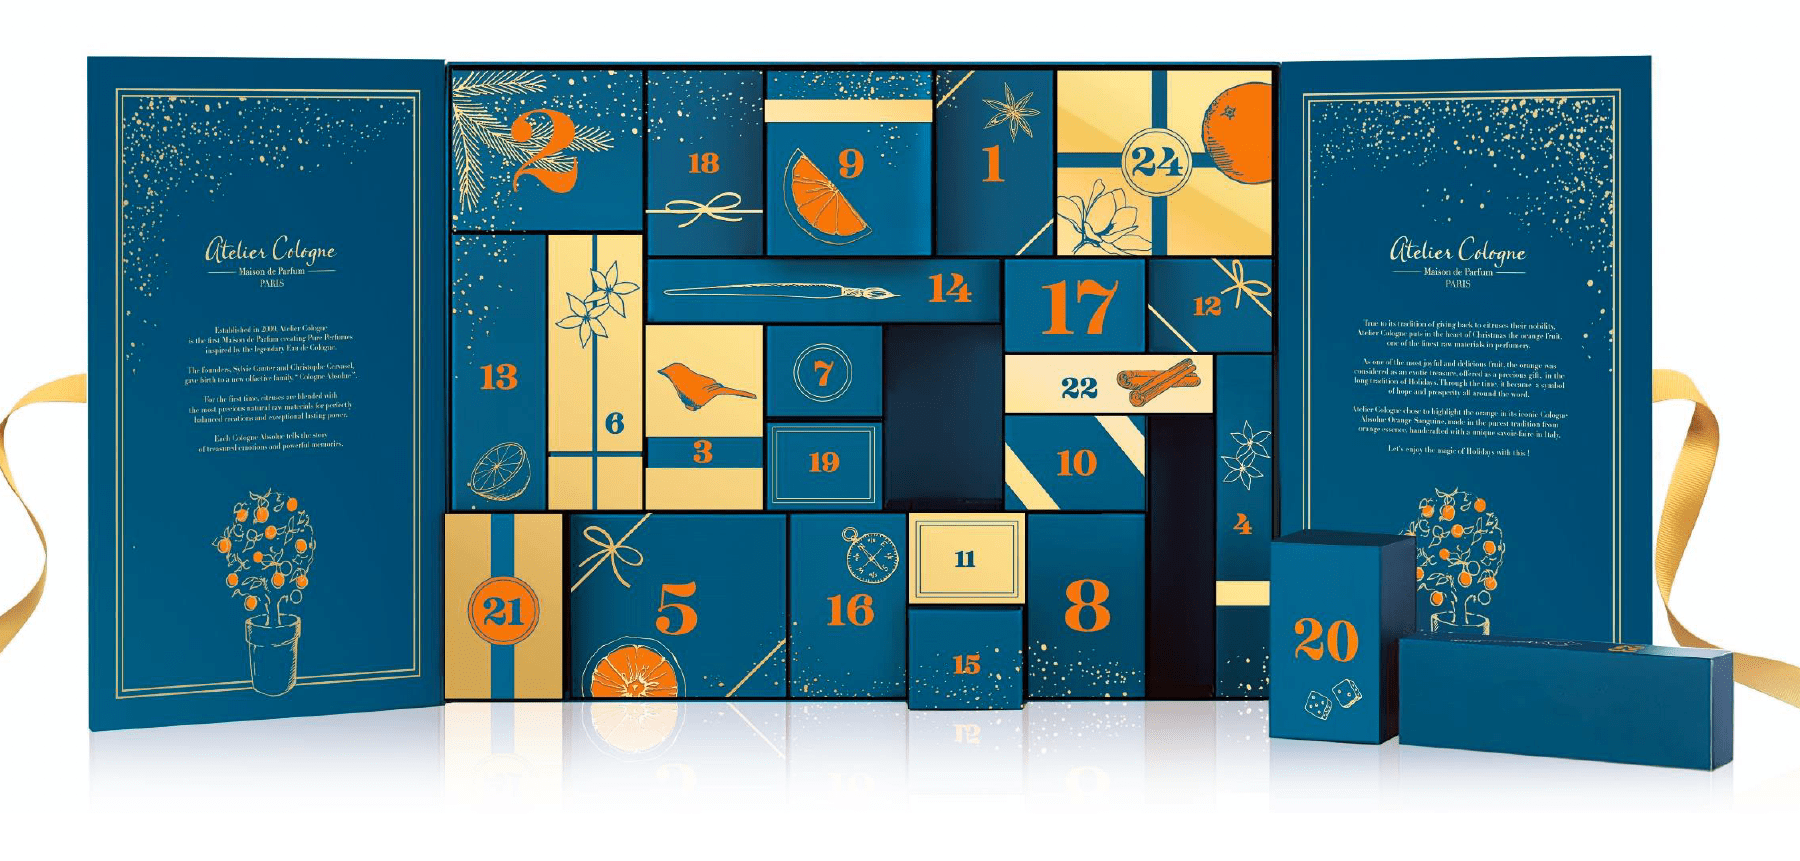 2018 Atelier Cologne Luxury Advent Calendar Available Now + Full